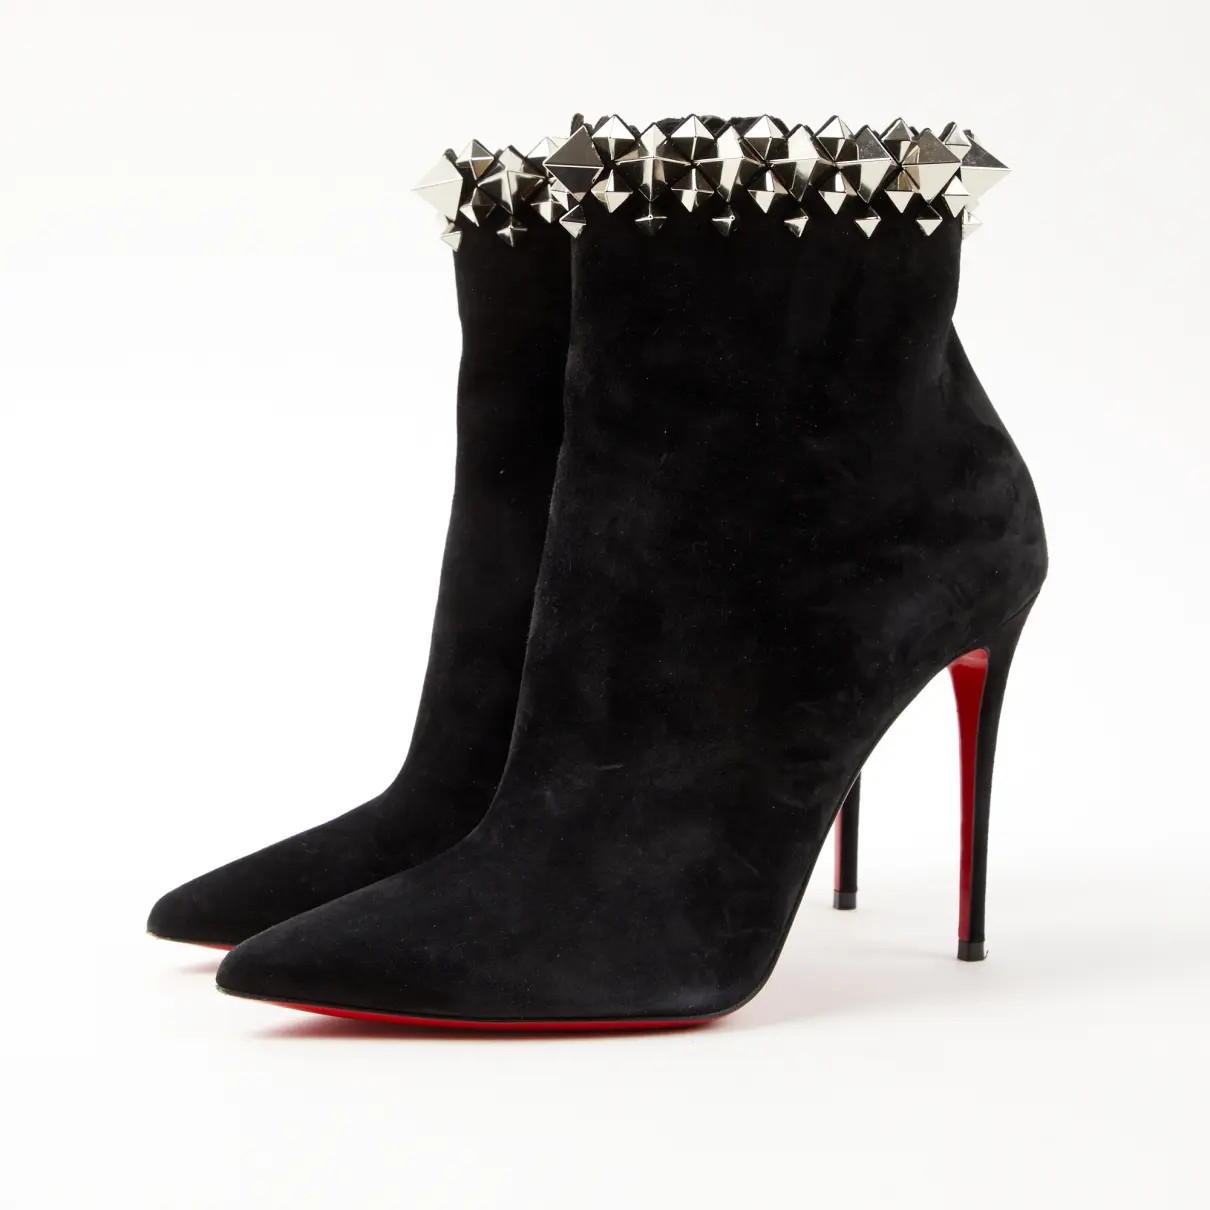 Buy Christian Louboutin So Kate Booty ankle boots online